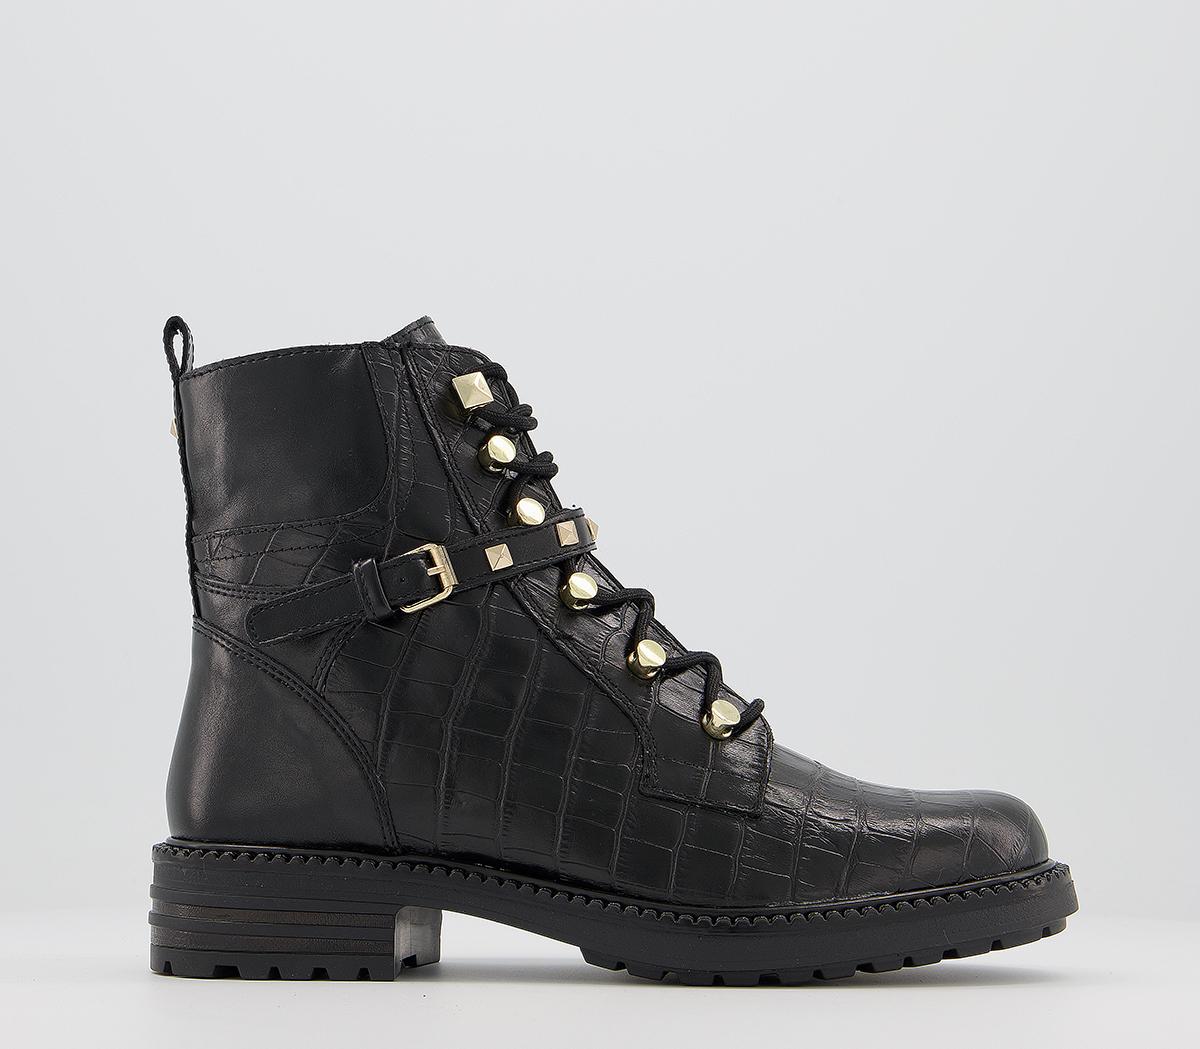 OFFICEApprove Feature Strap Lace Up BootsBlack Croc Leather Mix